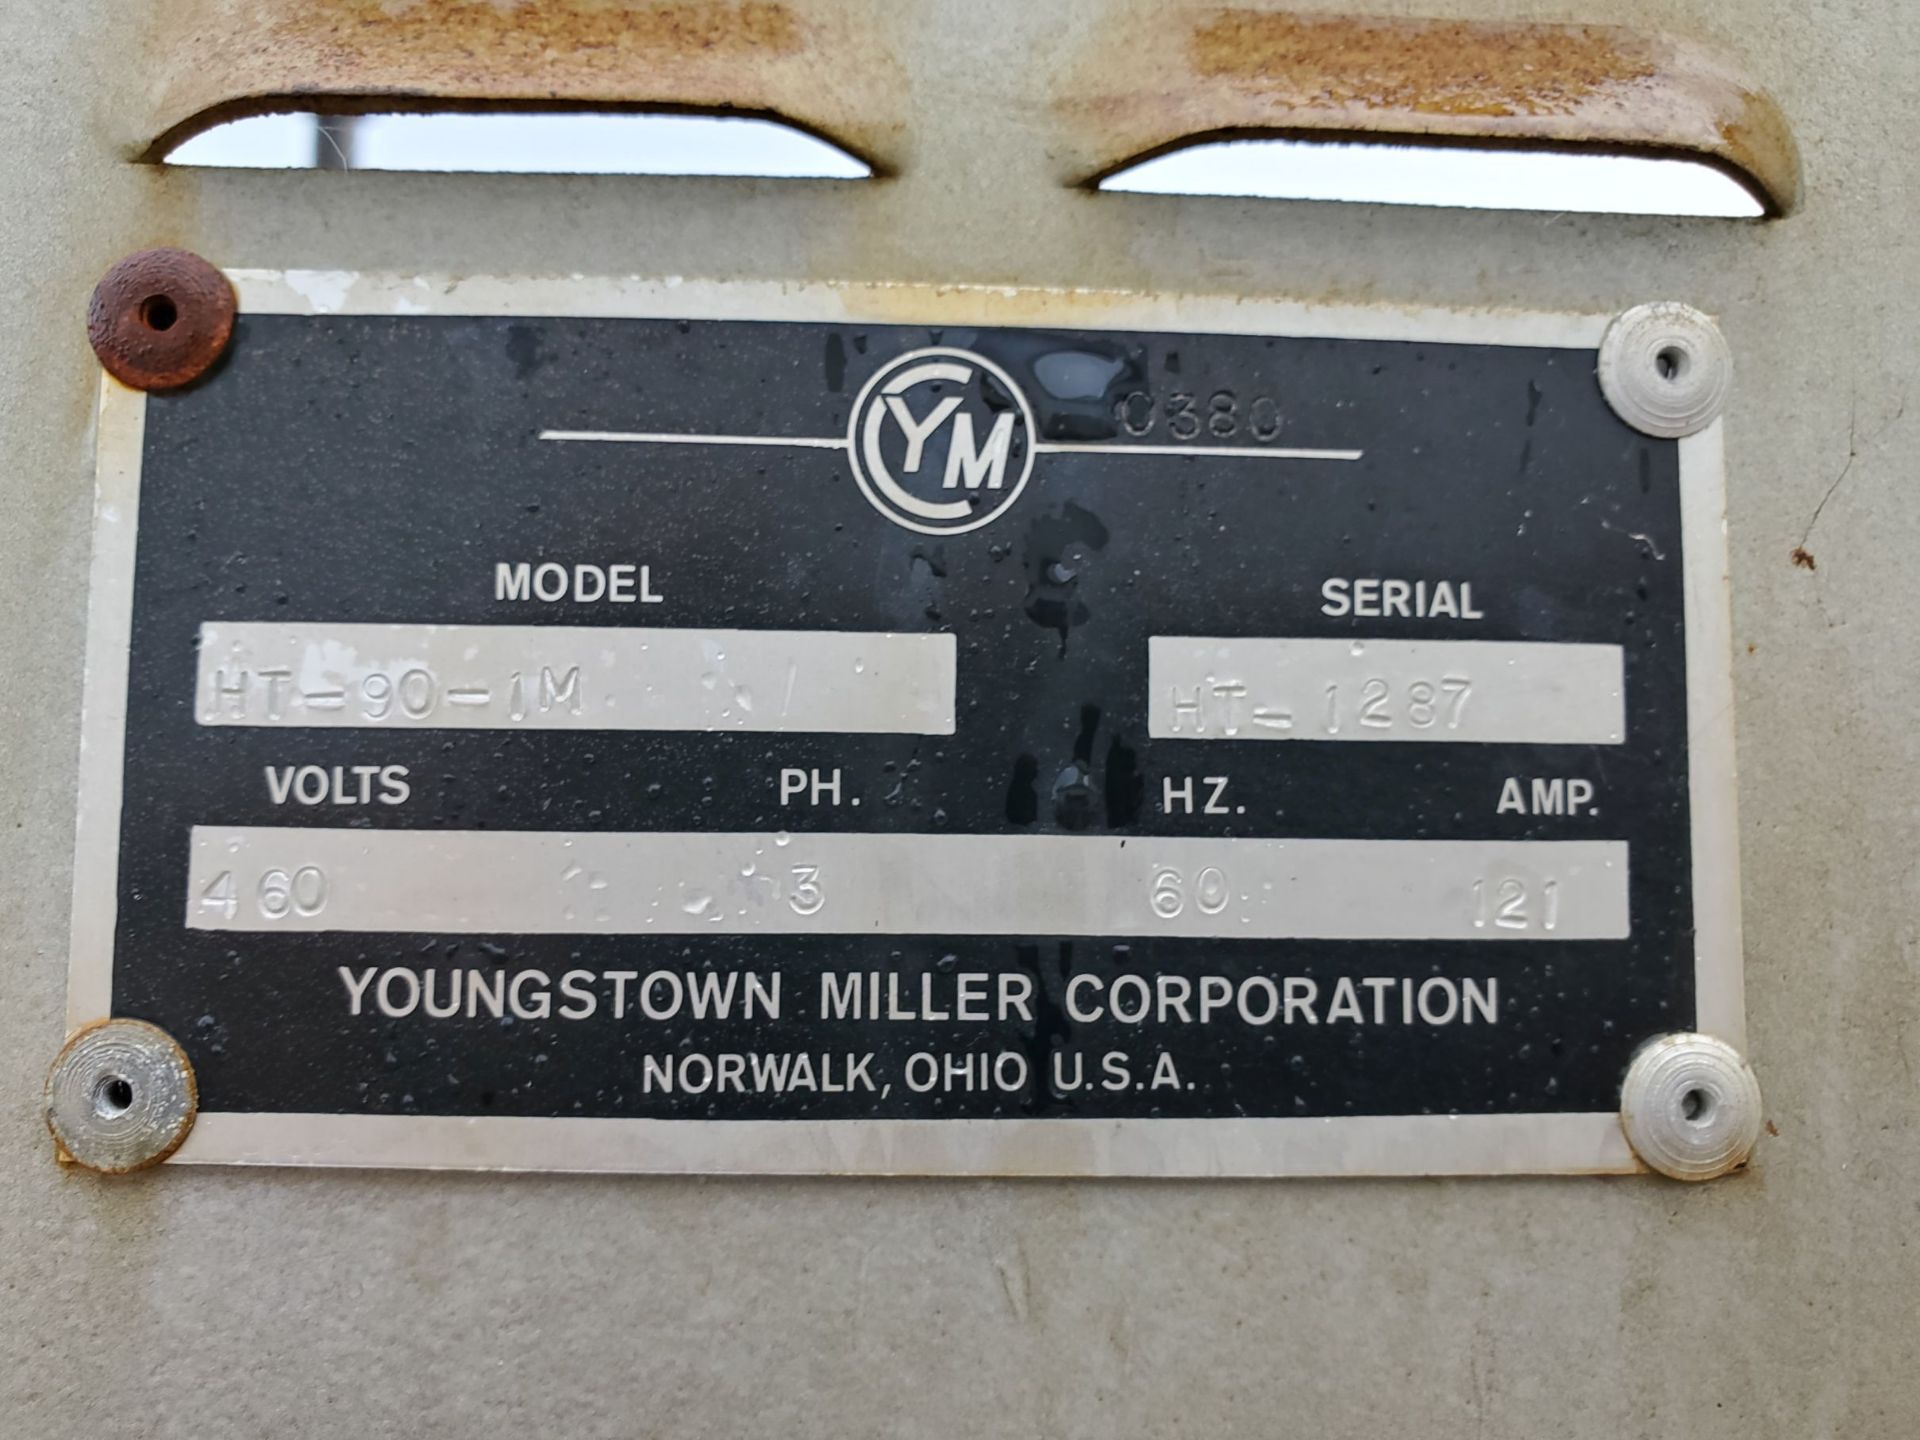 Youngstown Miller Heater, model HT-90-1M, serial number HT-1287, 460V/3phase/60 Hz/ 121 amps. - Image 2 of 6